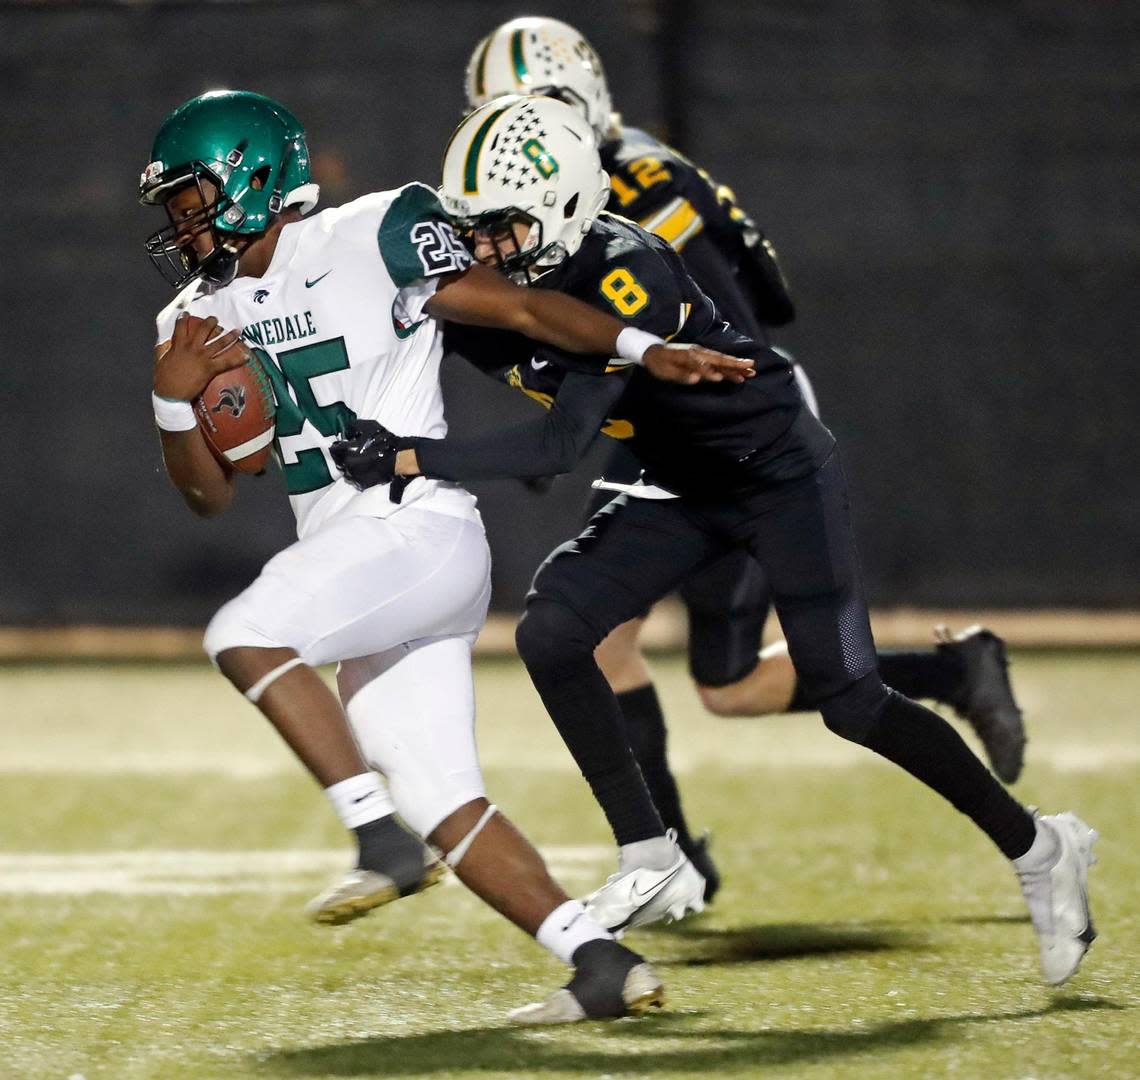 Kennedale running back Jeremiah Clea (25) takes Benbrook defensive backs Eli Guzman (8) and Jake Lindsay (12) downfield for extra yardage in a District 6-4A football game at Handley Field in Fort Worth, Texas, Friday Nov. 05, 2021. Kennedale defeated Benbrook 63-0. (Special to the Star-Telegram Bob Booth) Bob Booth/Bob Booth